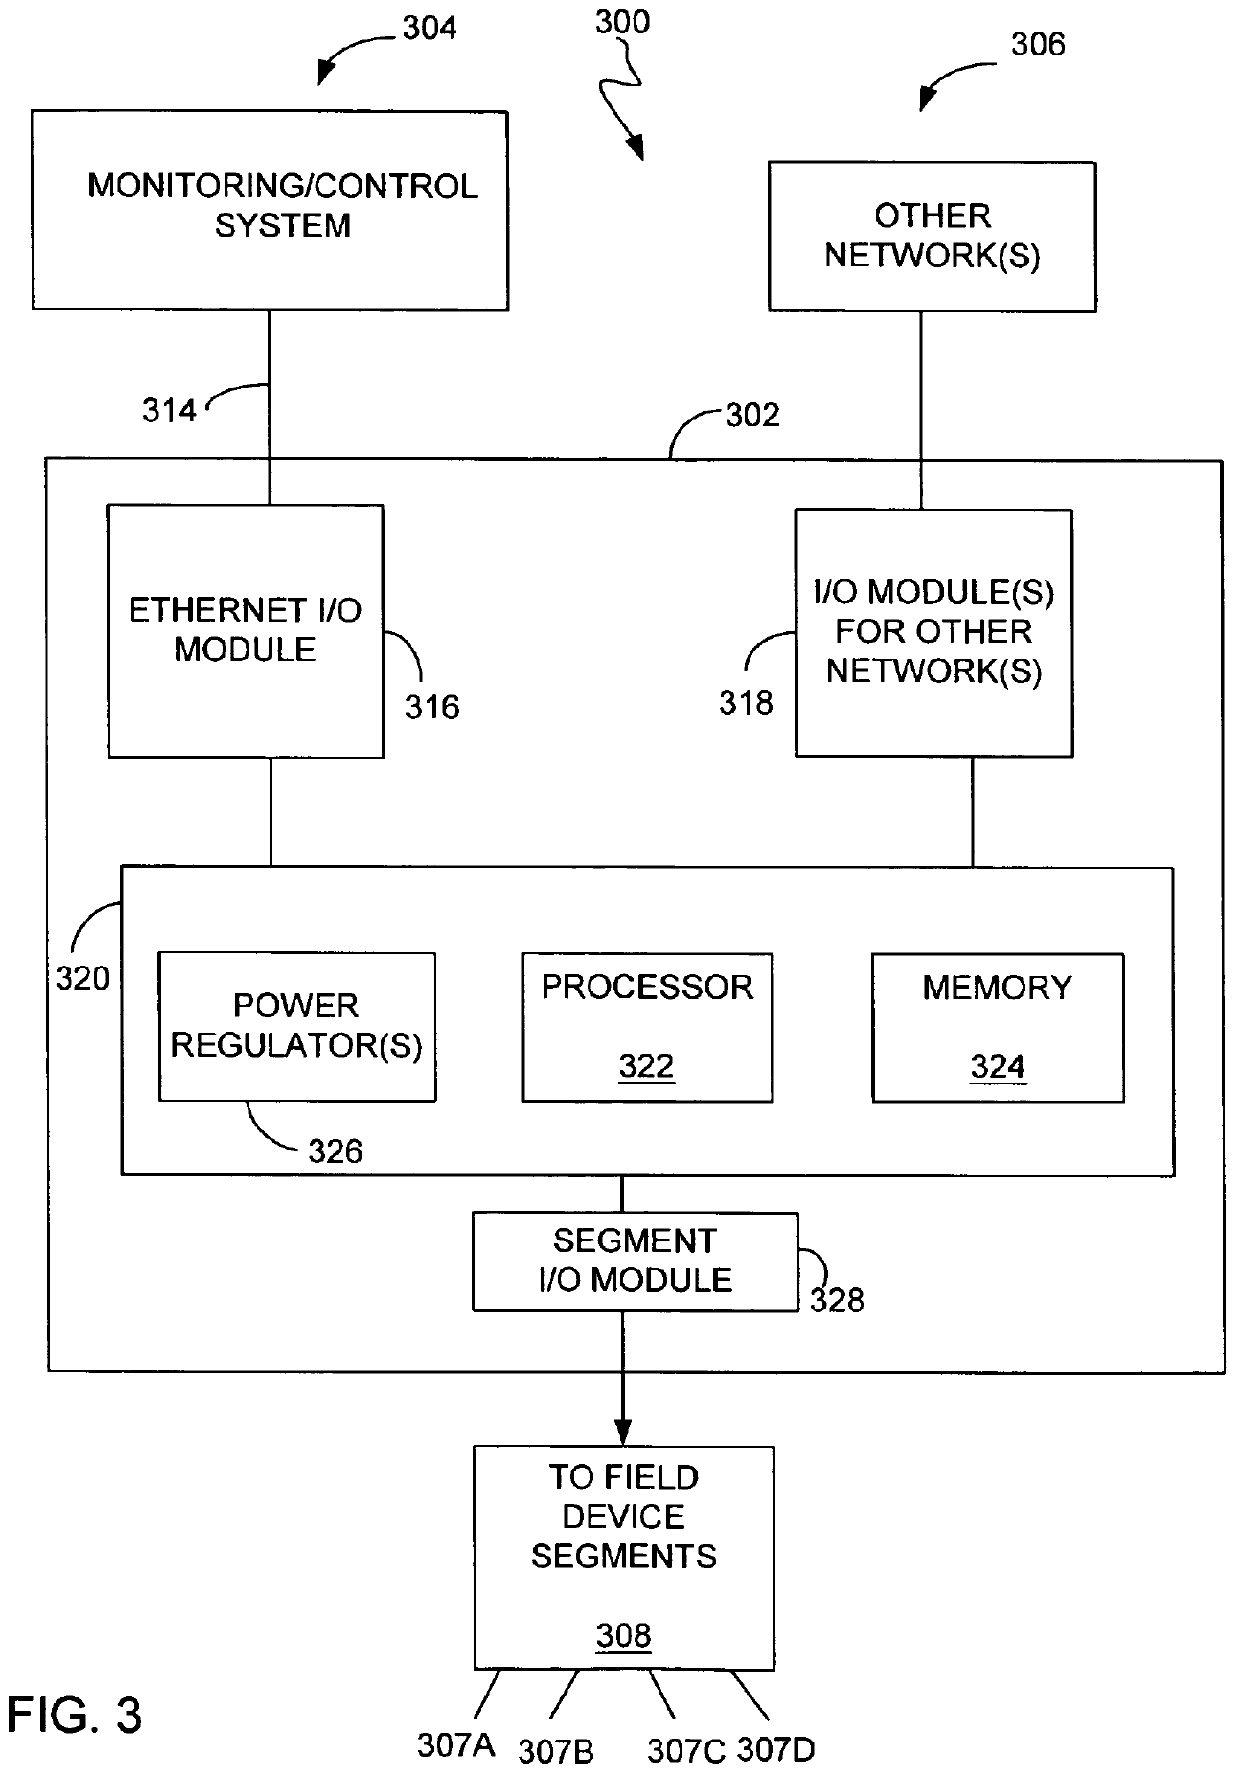 Field-based asset management device and architecture